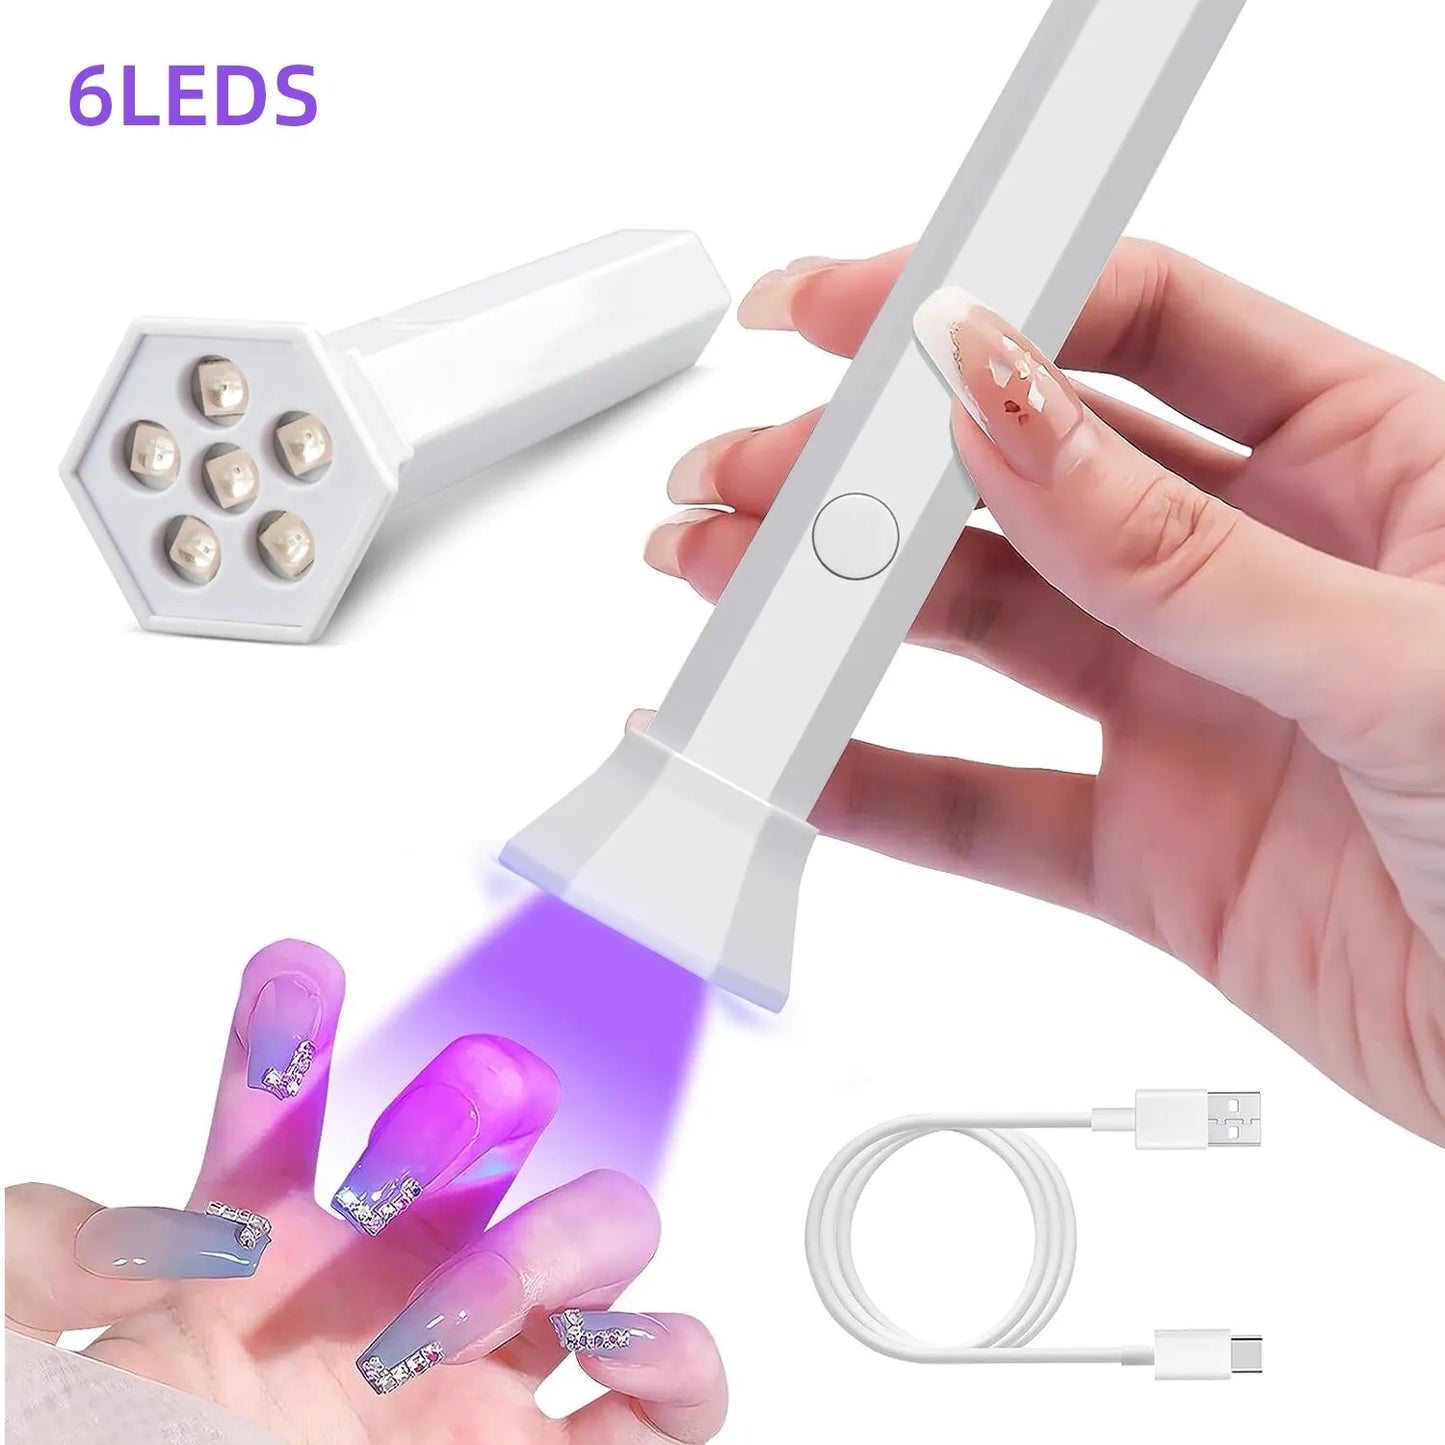 Portable Nail Dryer Lamp - UV LED Nail Light for Curing All Gel Polish - USB Rechargeable Quick Dry Manicure Machine - Nail Art Tools